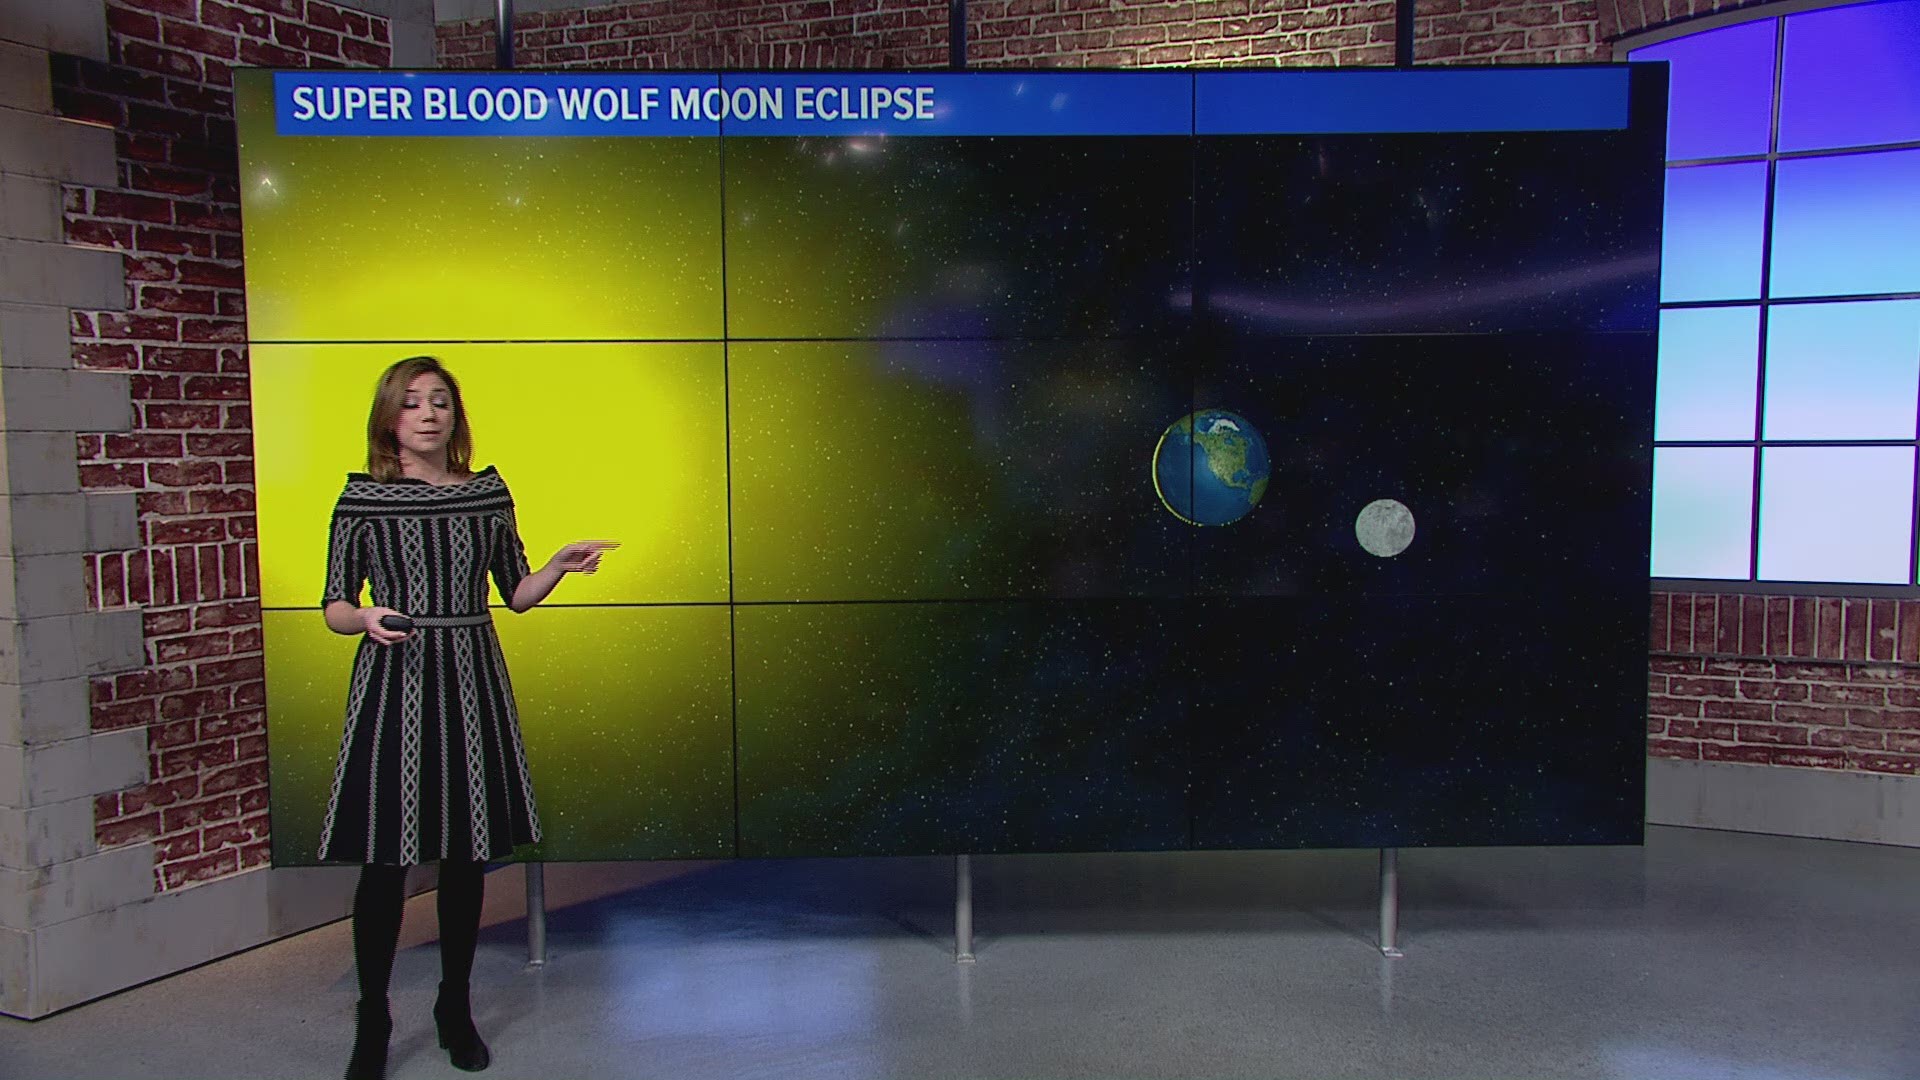 There will be a Super Blood Wolf Moon Eclipse Sunday night over DC. Here's what it is and when it will happen.